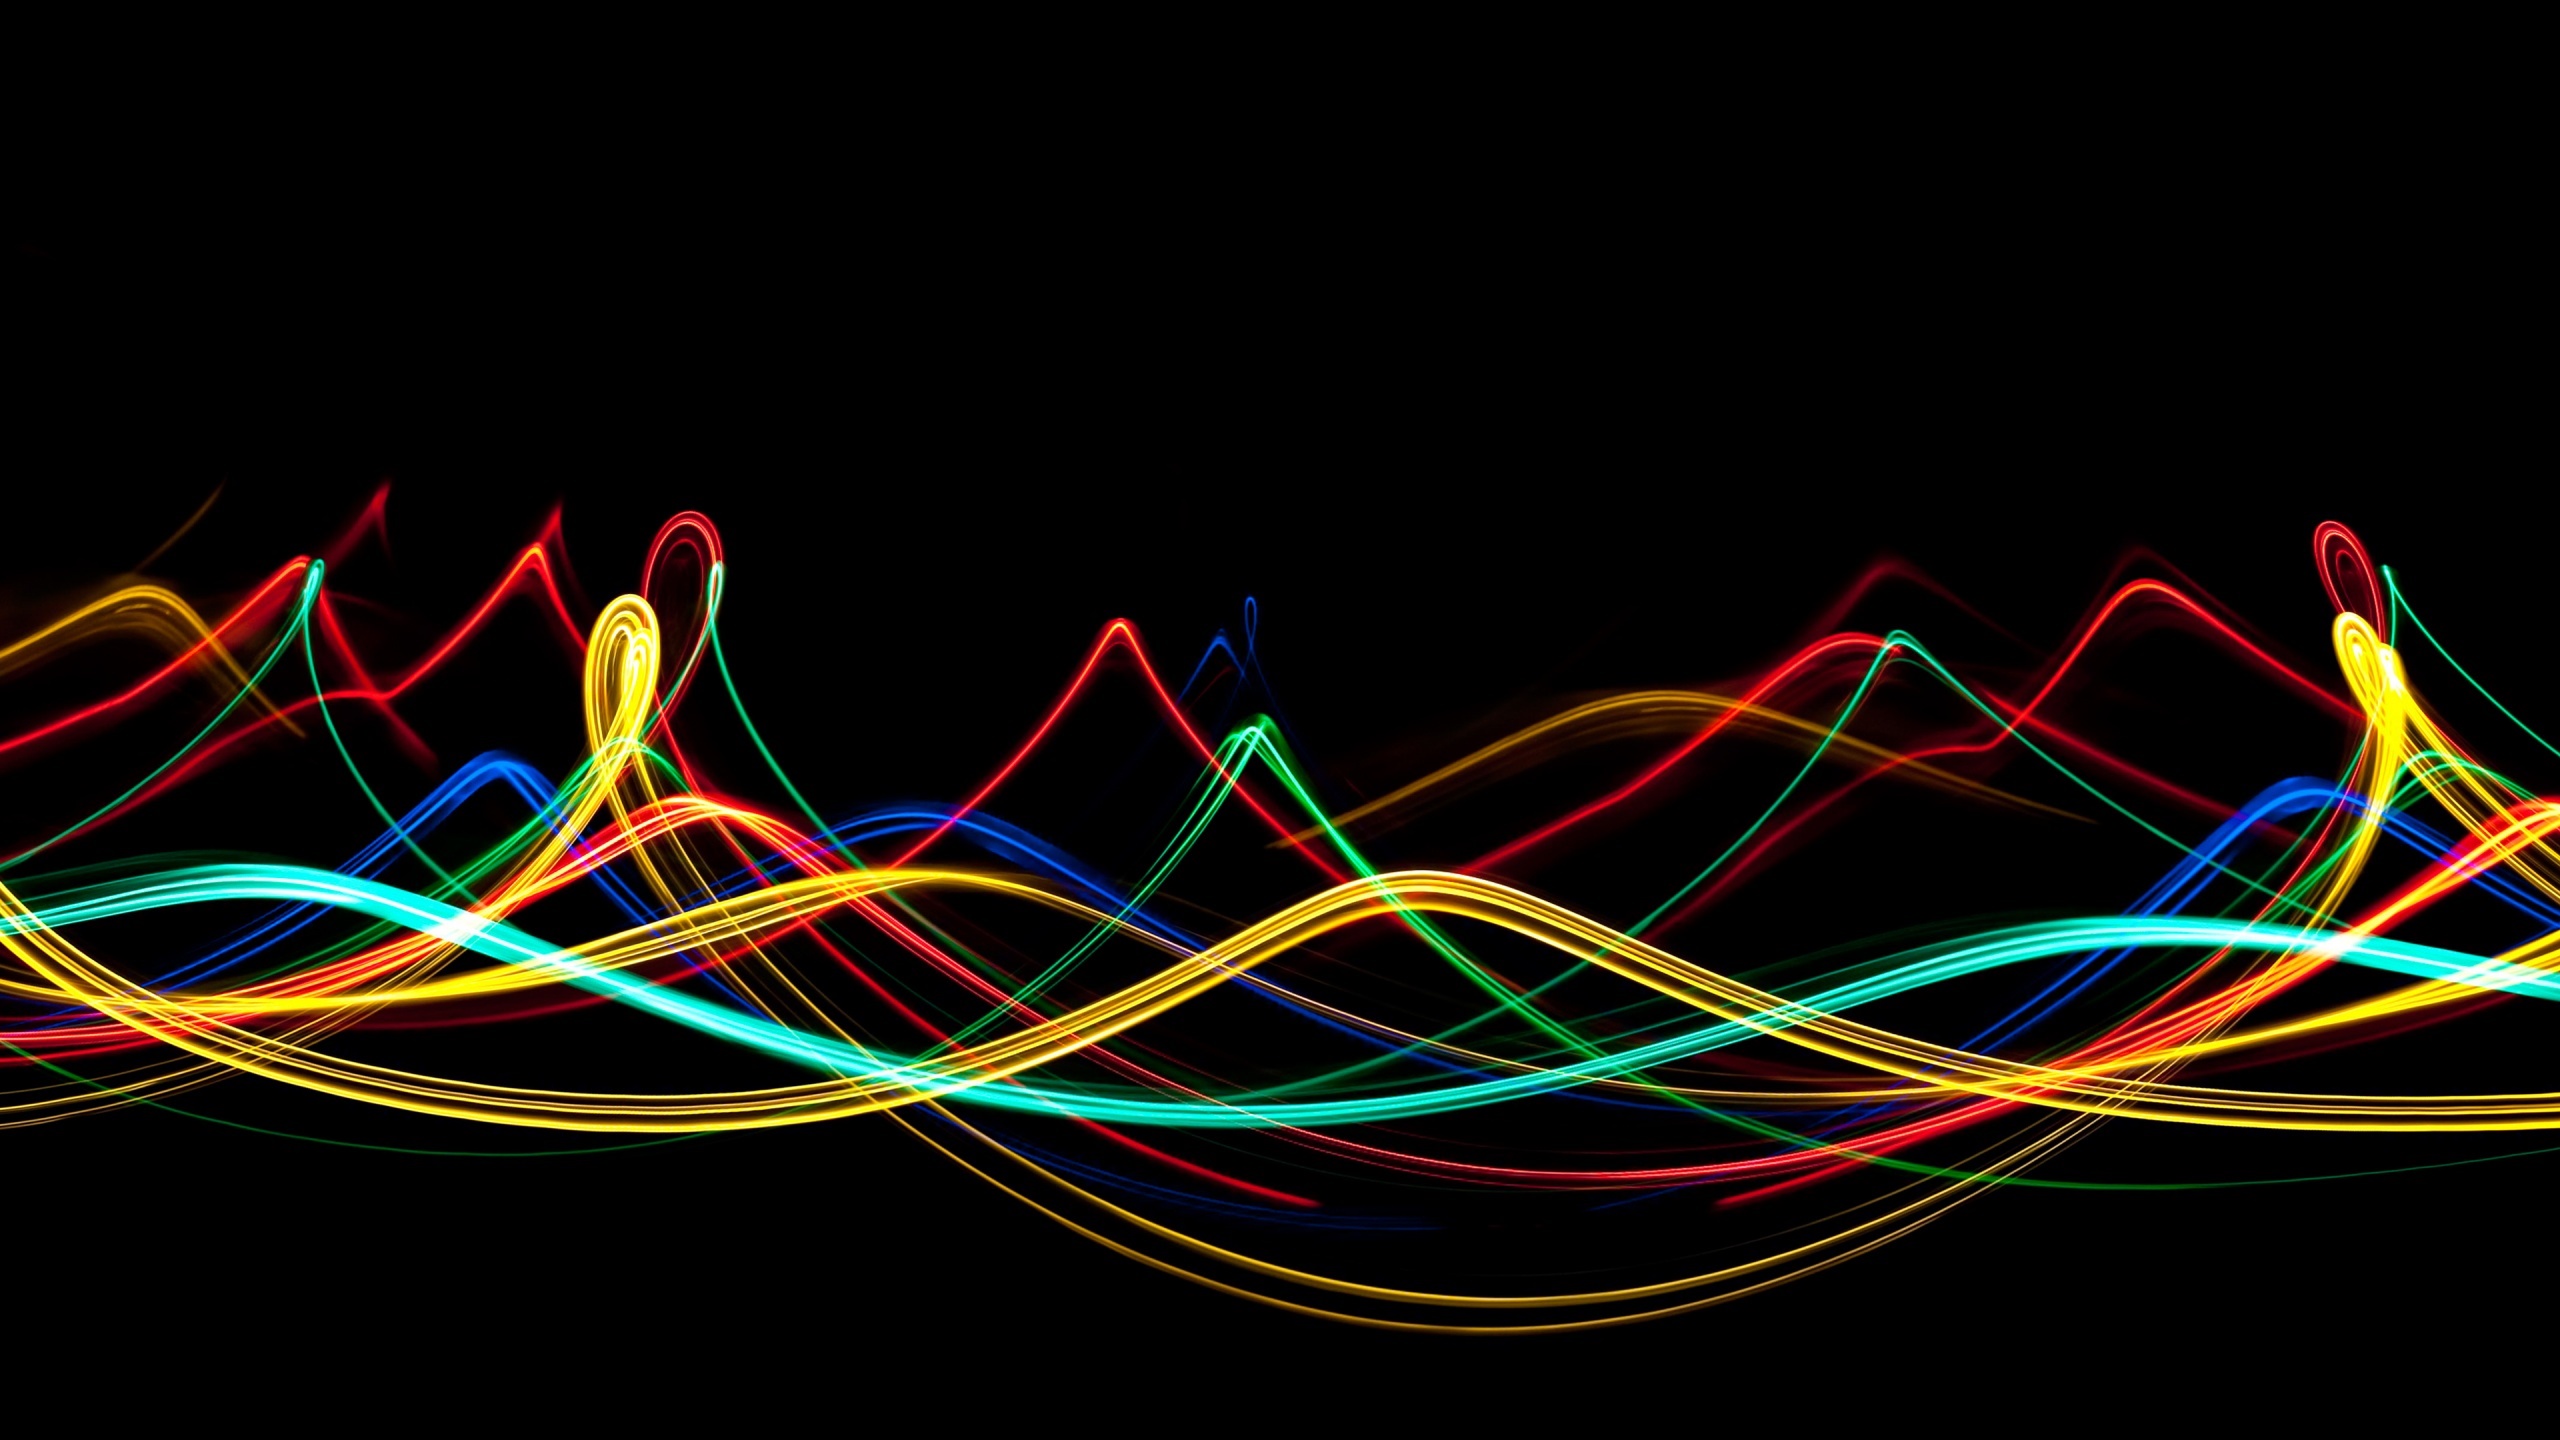 Red Yellow and Blue Light. Wallpaper in 2560x1440 Resolution